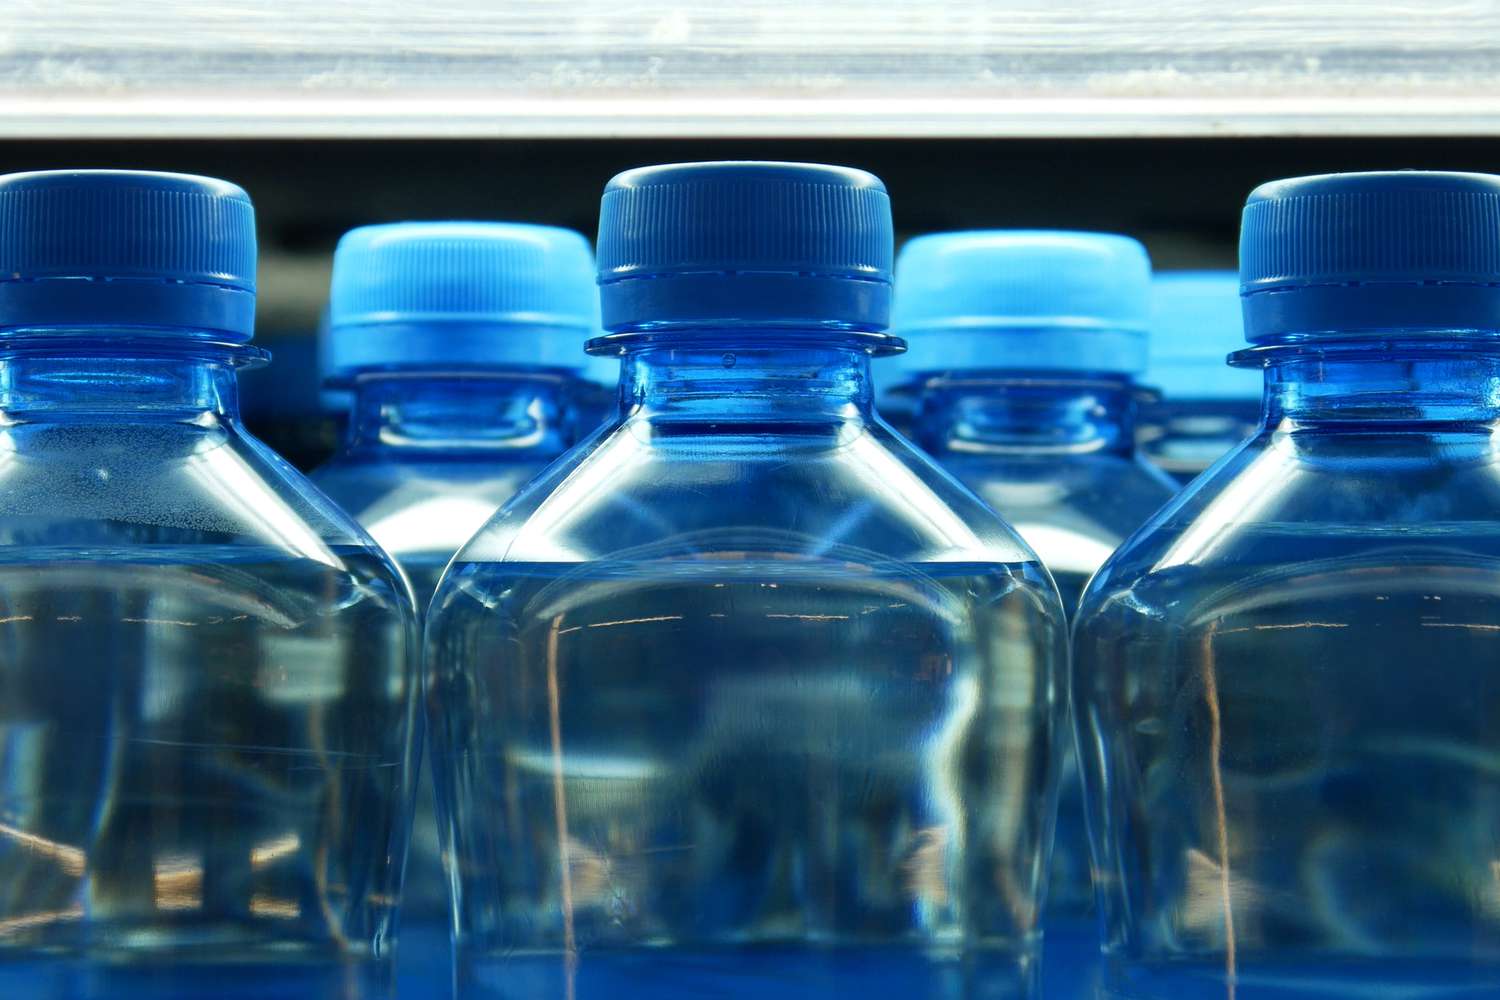 Breaking News: Nearly 2 Million FIJI Water Bottles Pulled Off Shelves Due to Health Concerns